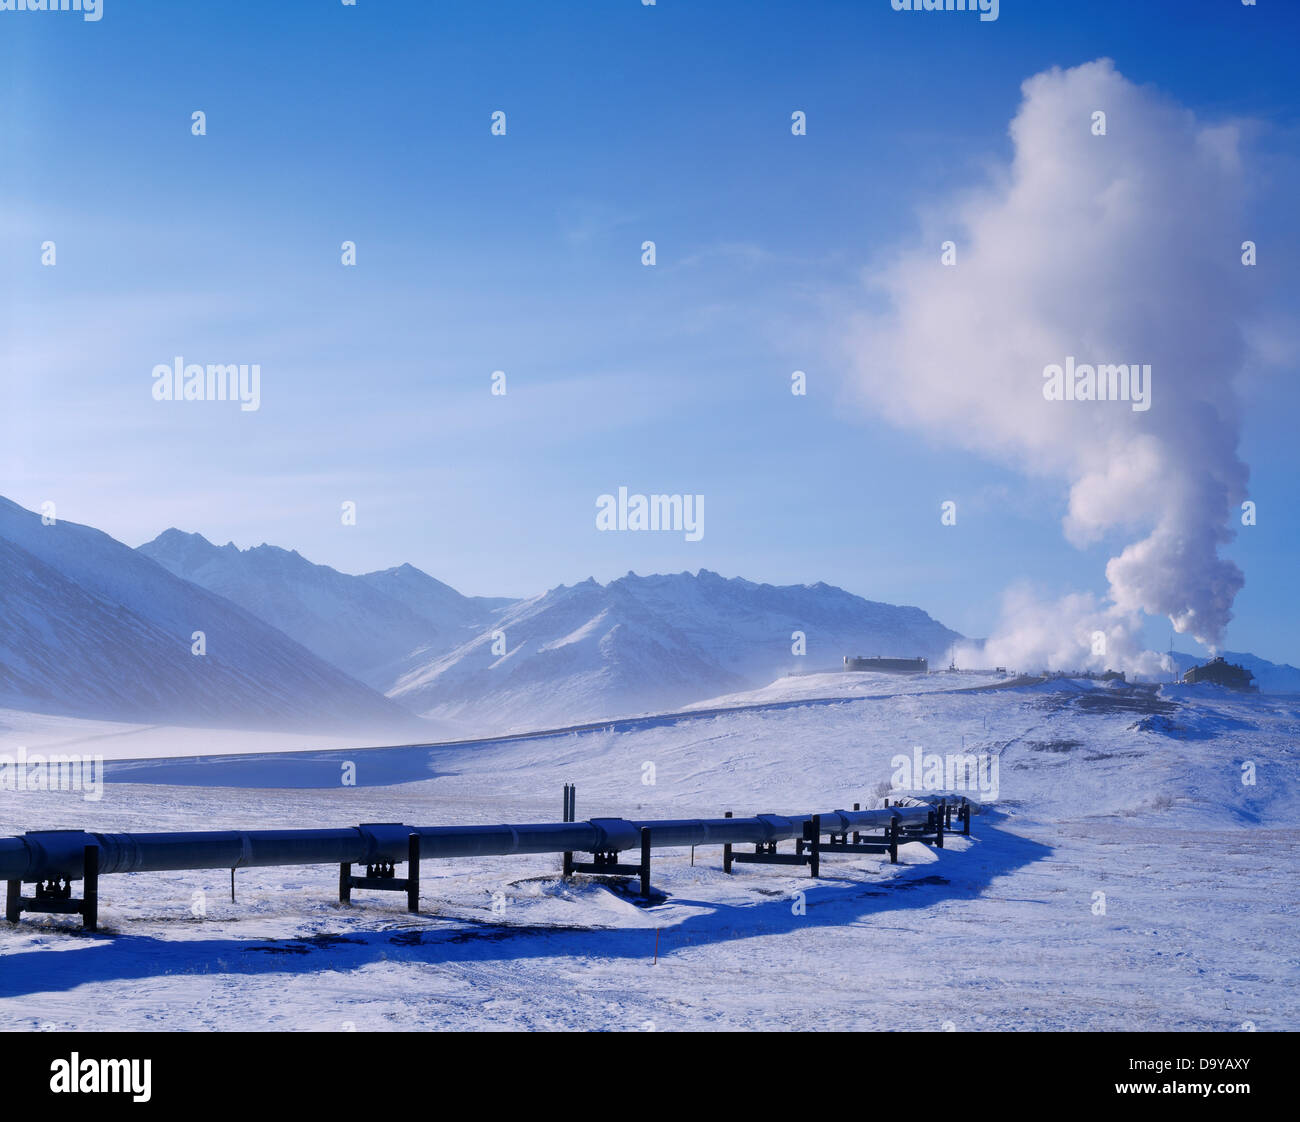 Trans Alaska Pipeline and Alyeska Pump Station 4 on -50¼F morning in late March, north side of the Brooks Range, Alaska. Stock Photo